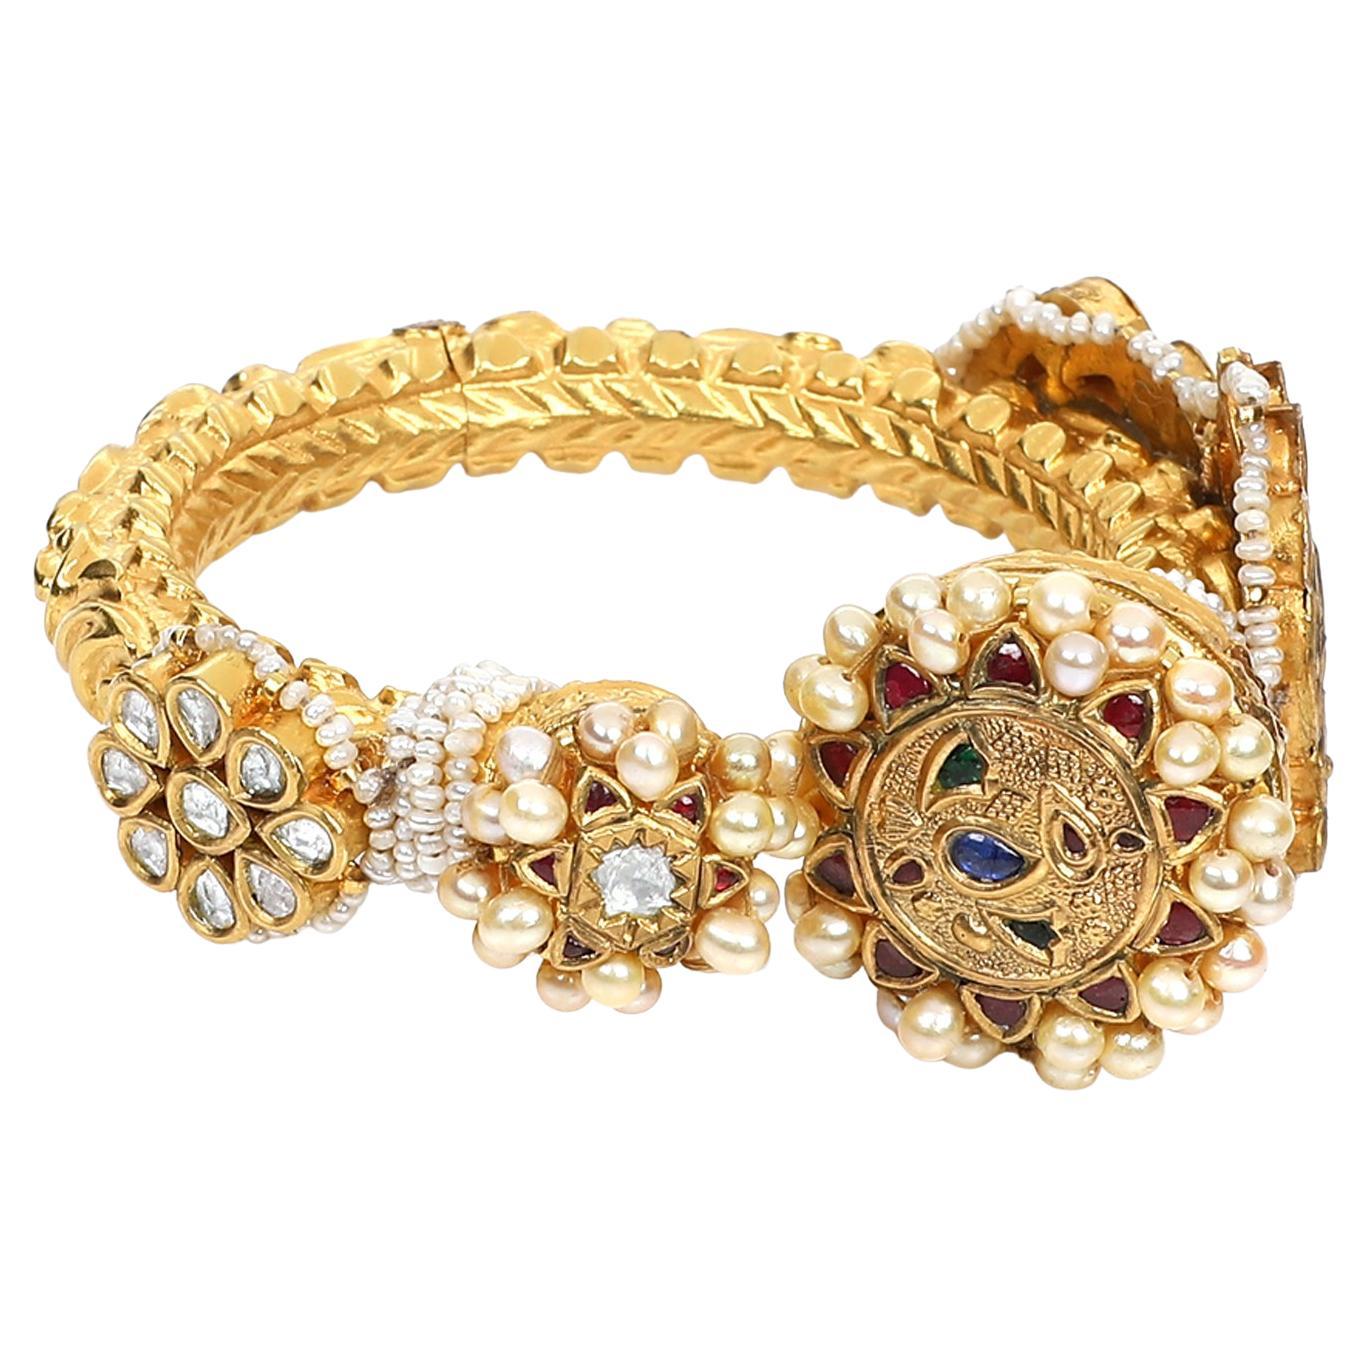 Peacock jadau gold bangle by Vintage intention